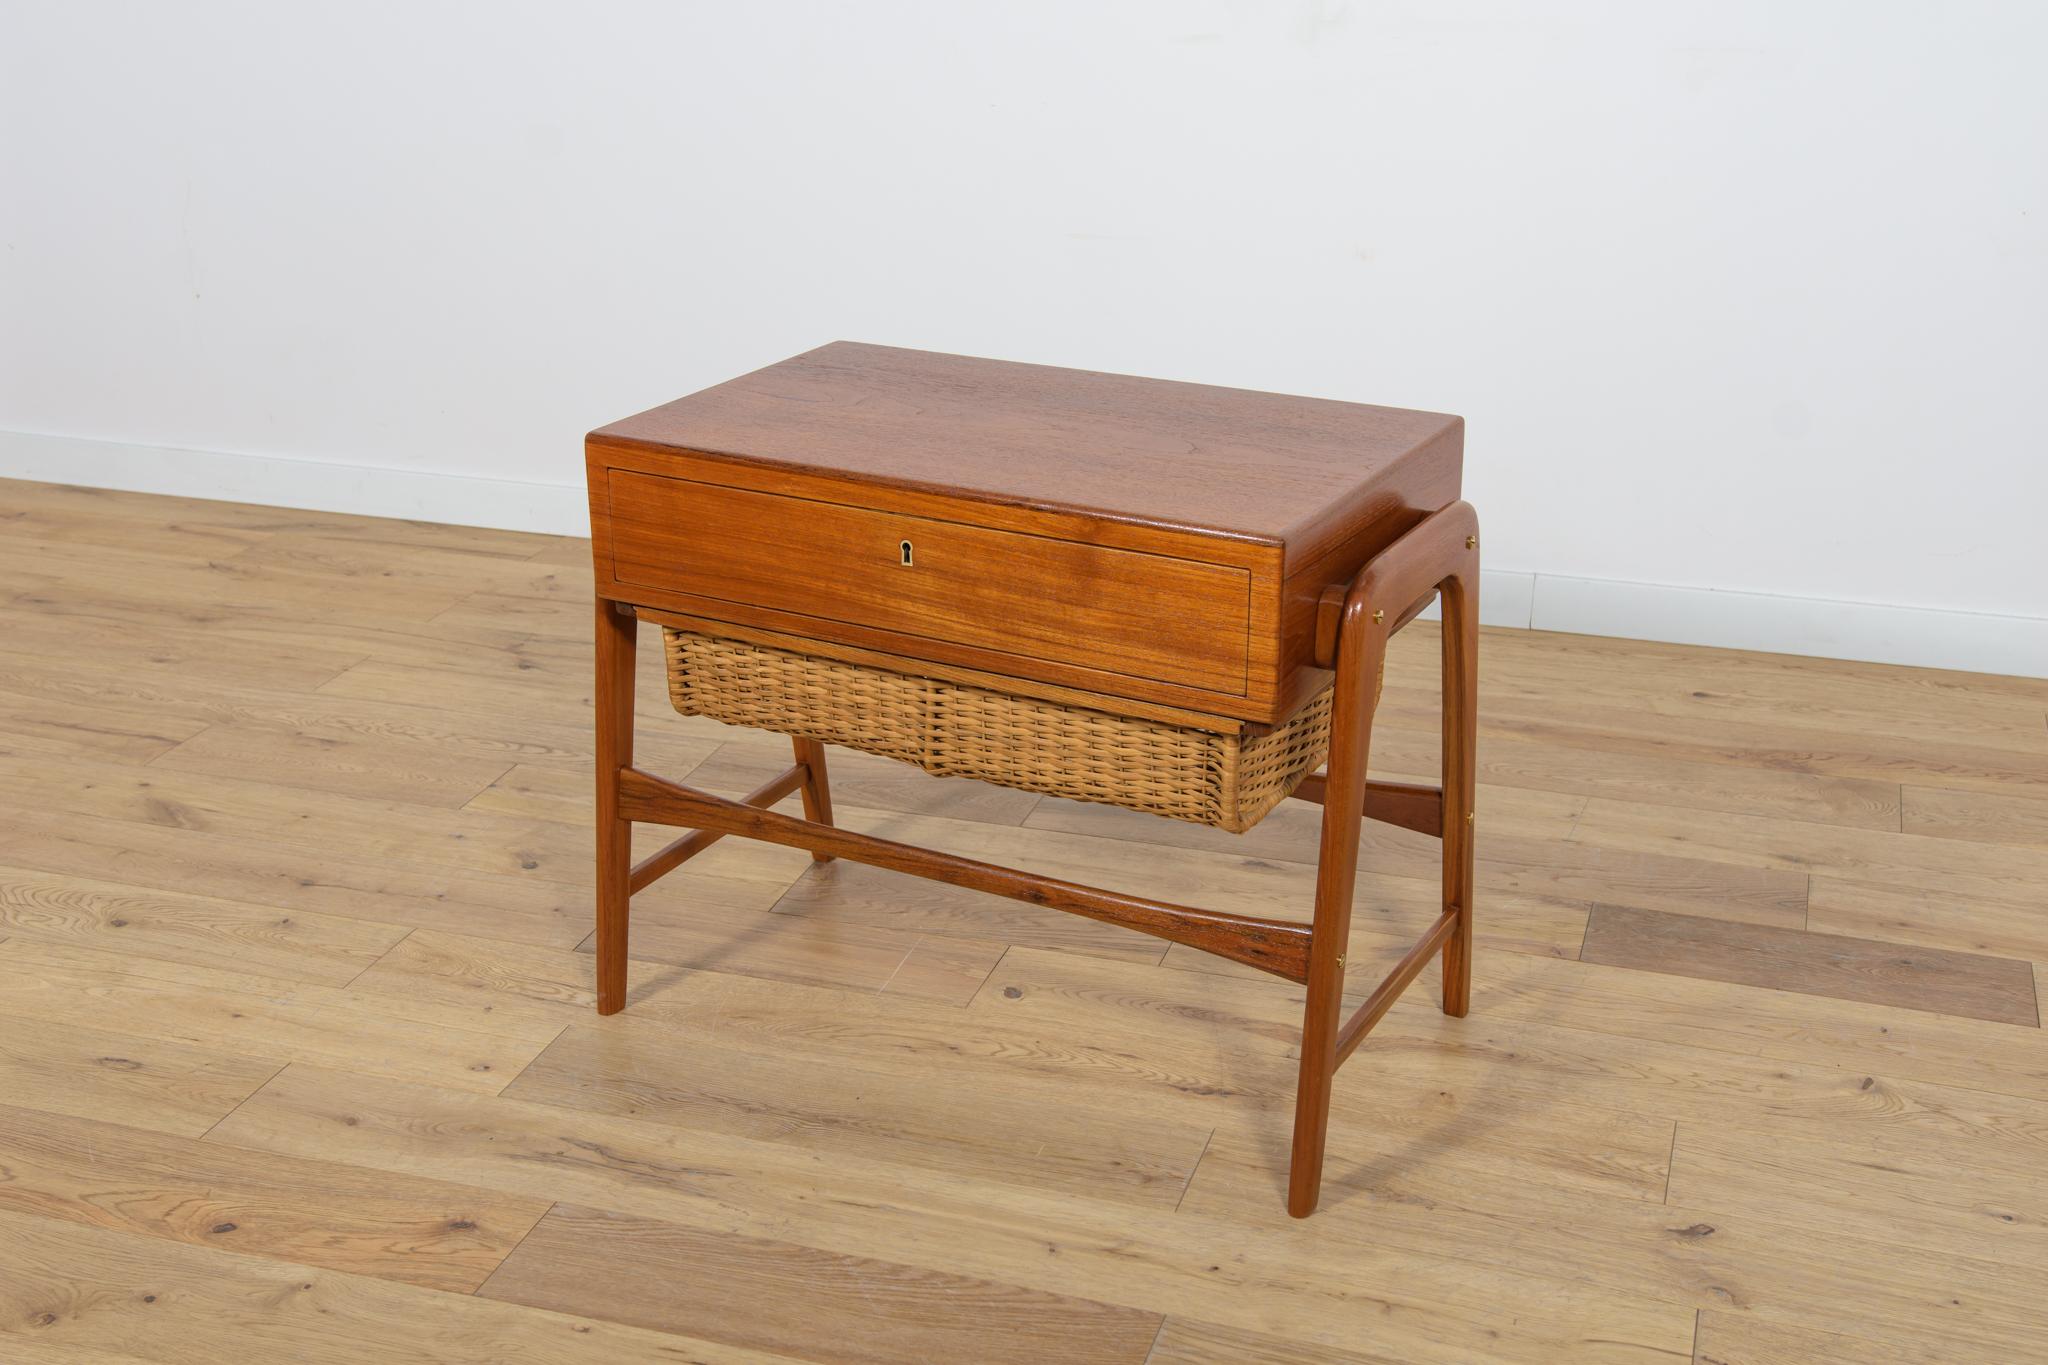 
Unique console made in Denmark in the 70s. Made of teak wood, in the lower part there is a wicker extendable drawer. It has undergone a thorough renovation, the wood has been cleaned of the old coating, and finished with Danish Rustins oil.